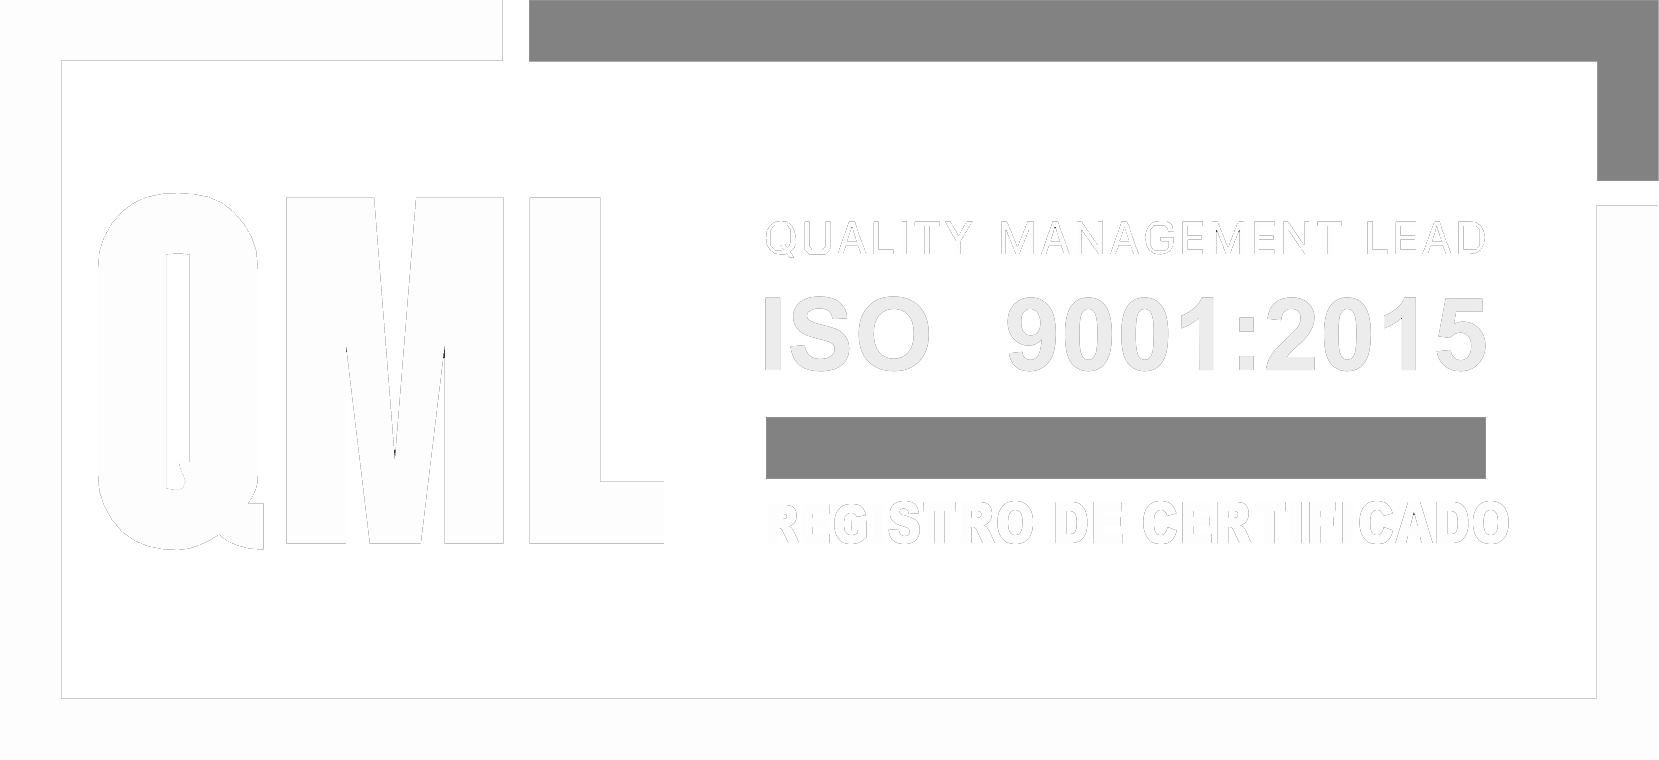 ISO-9001 certification